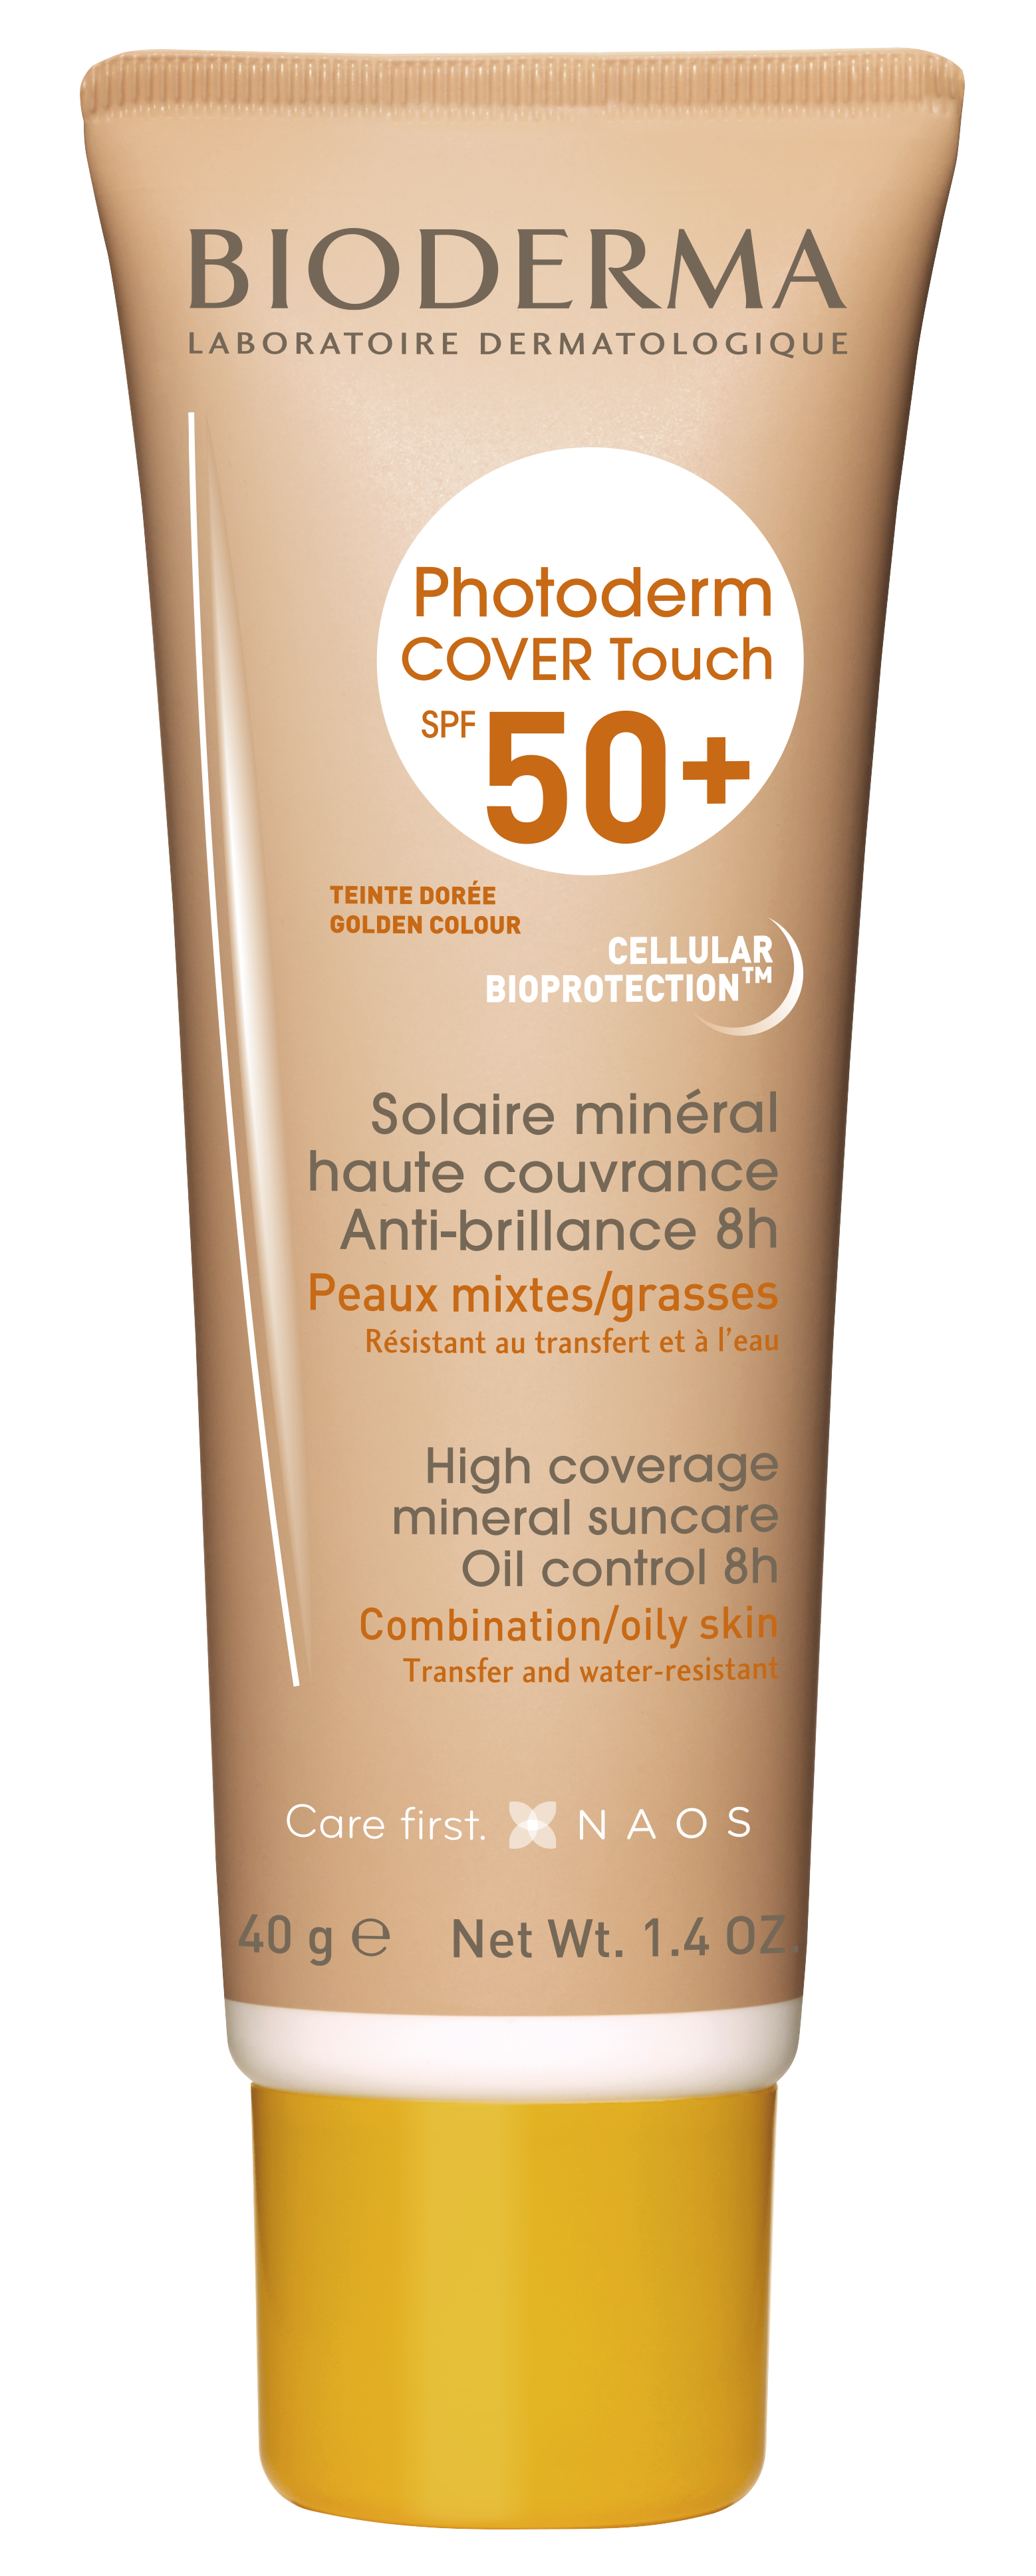 Bioderma Photoderm COVER Touch SPF 50+ High coverage mineral sunscreen, Golden tint 40g